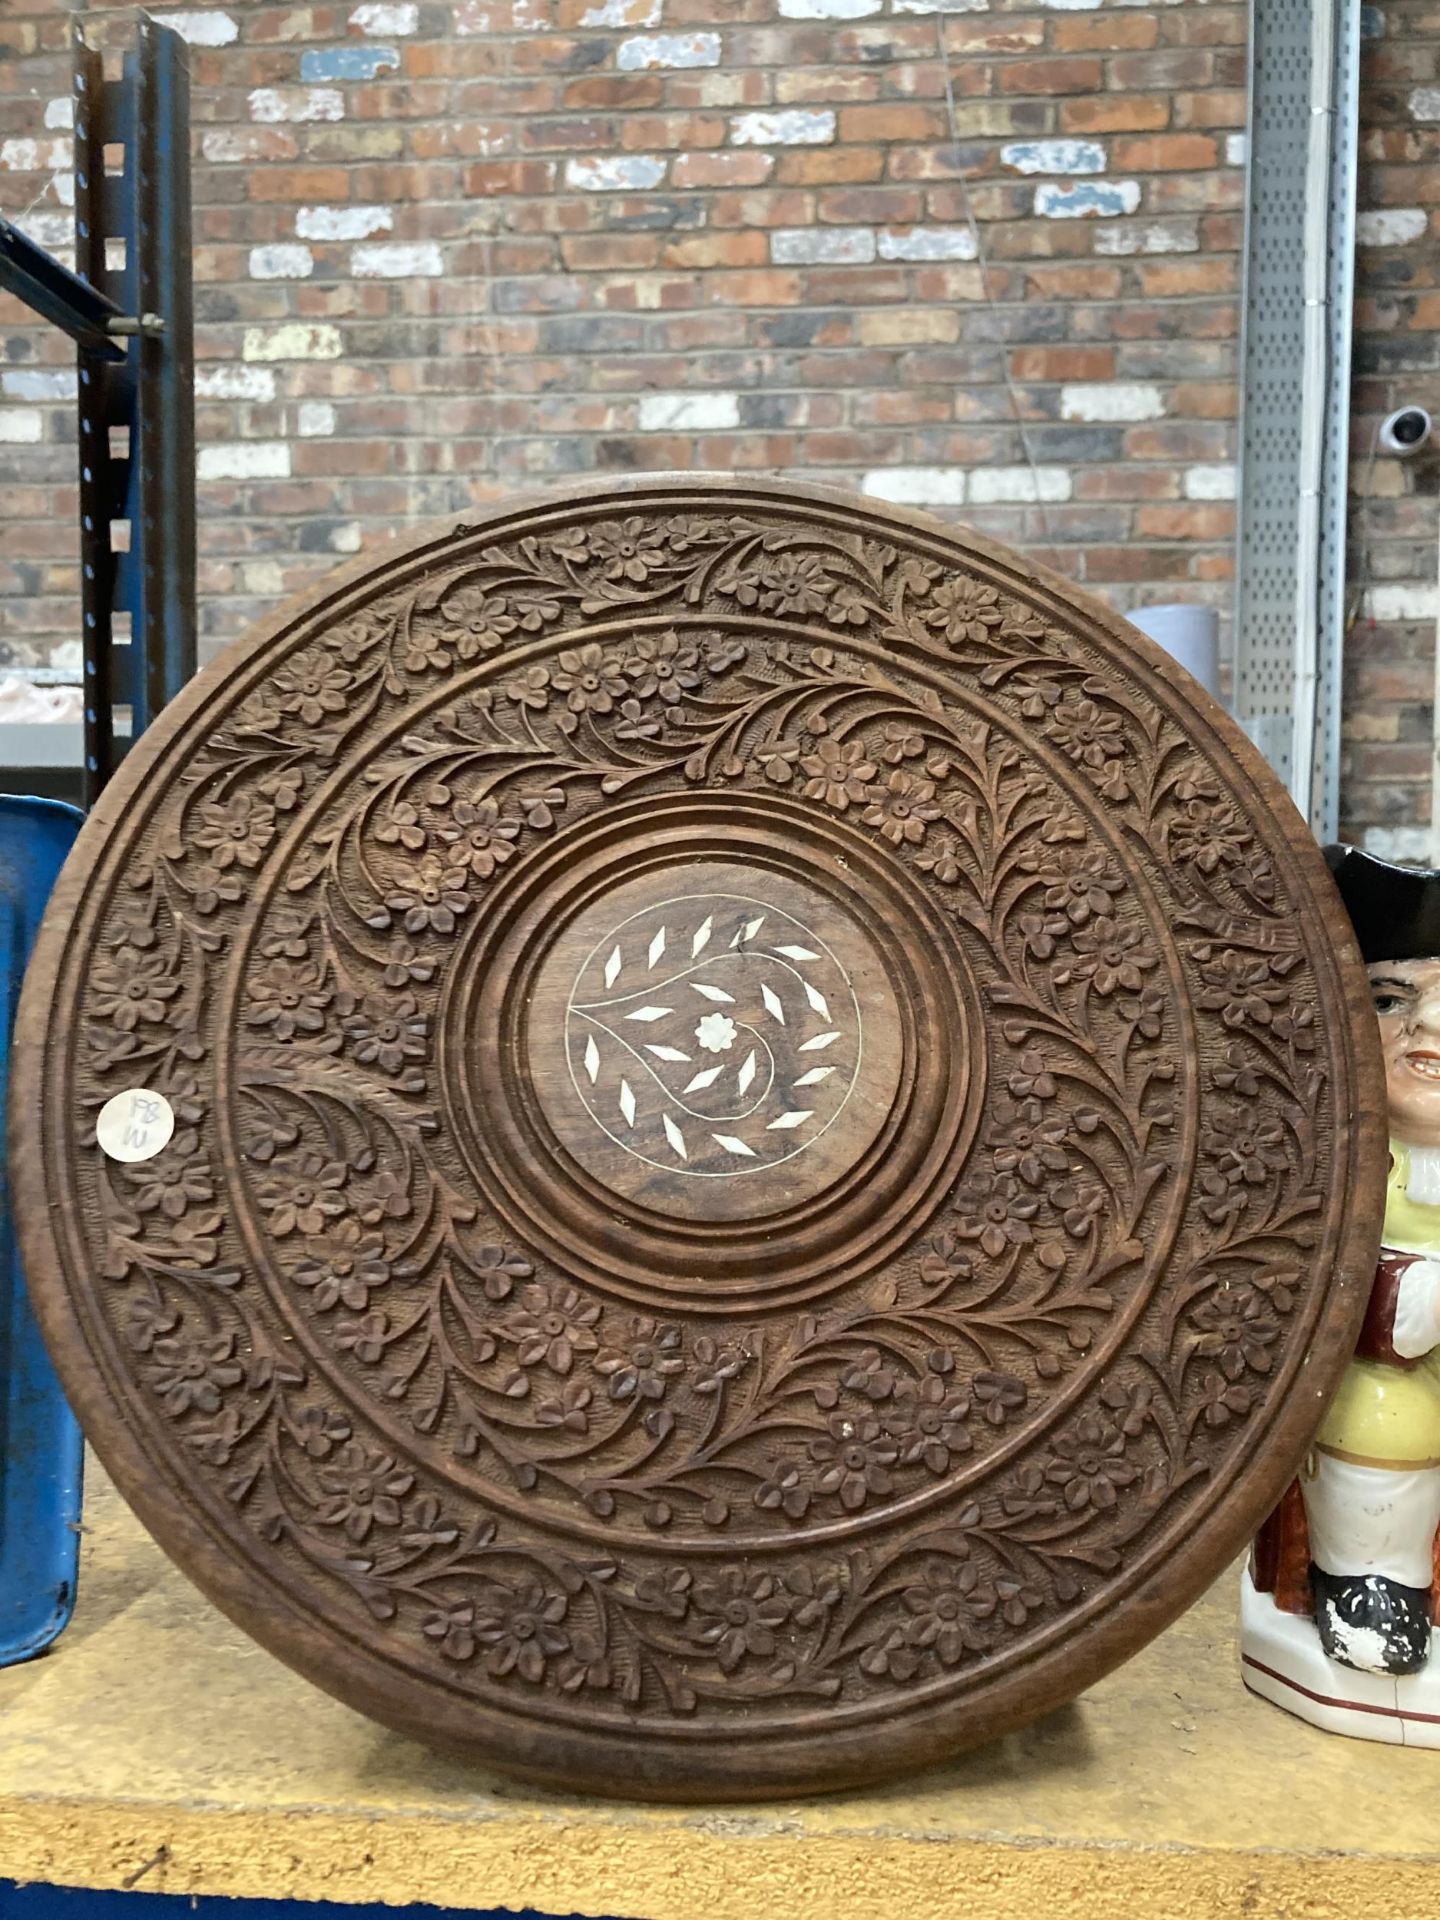 A SMALL HEAVILY CARVED ASIAN STYLE TABLE WITH THREE LEGS, HEIGHT 38CM, DIAMETER 37CM - Image 2 of 2